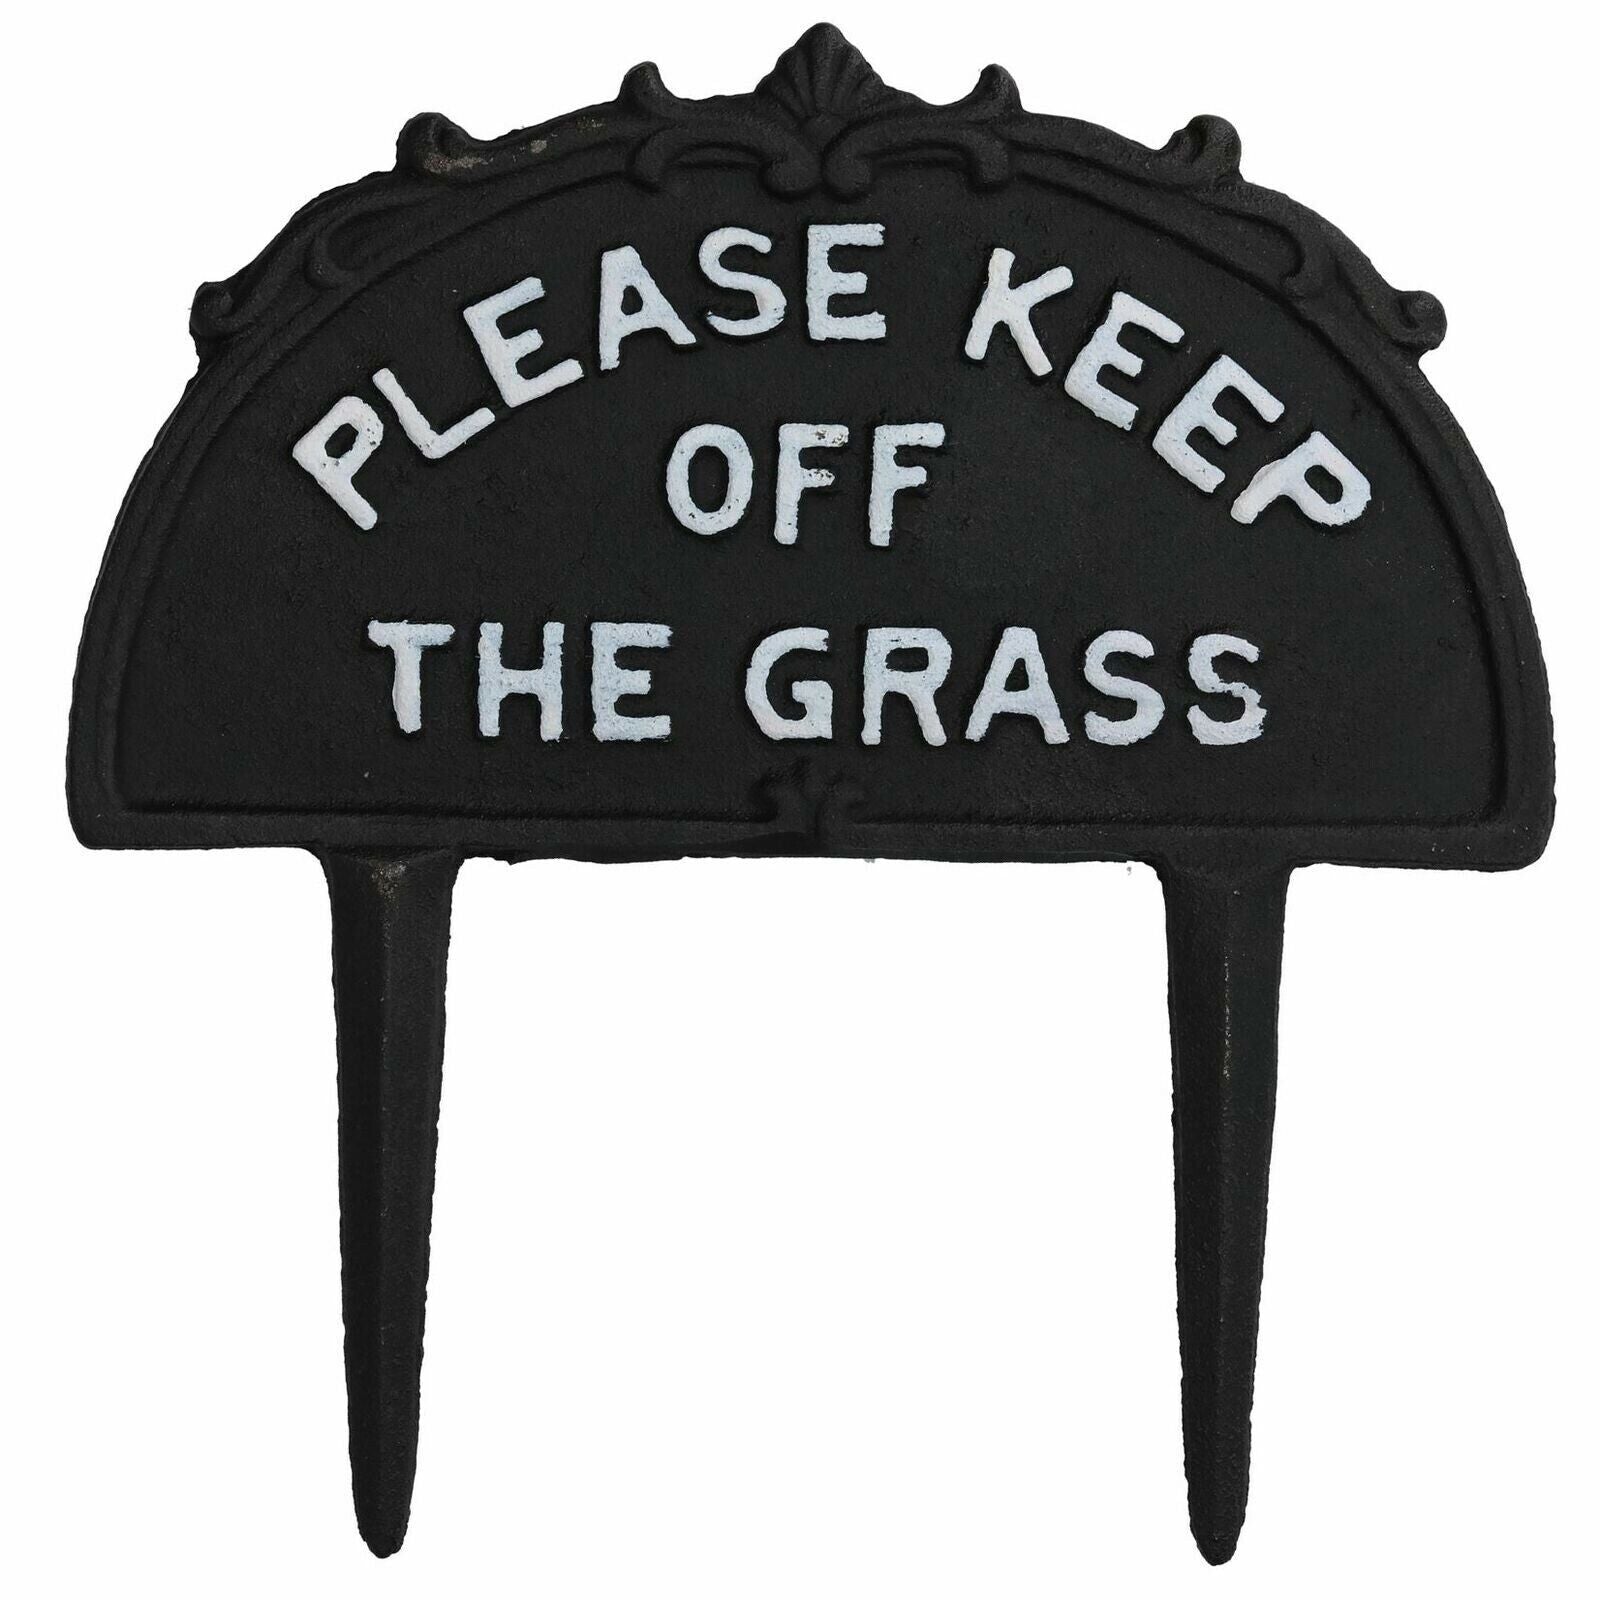 Keep Off The Grass Metal Cast Iron Sign Polite Notice Lawn Stake Ornamental